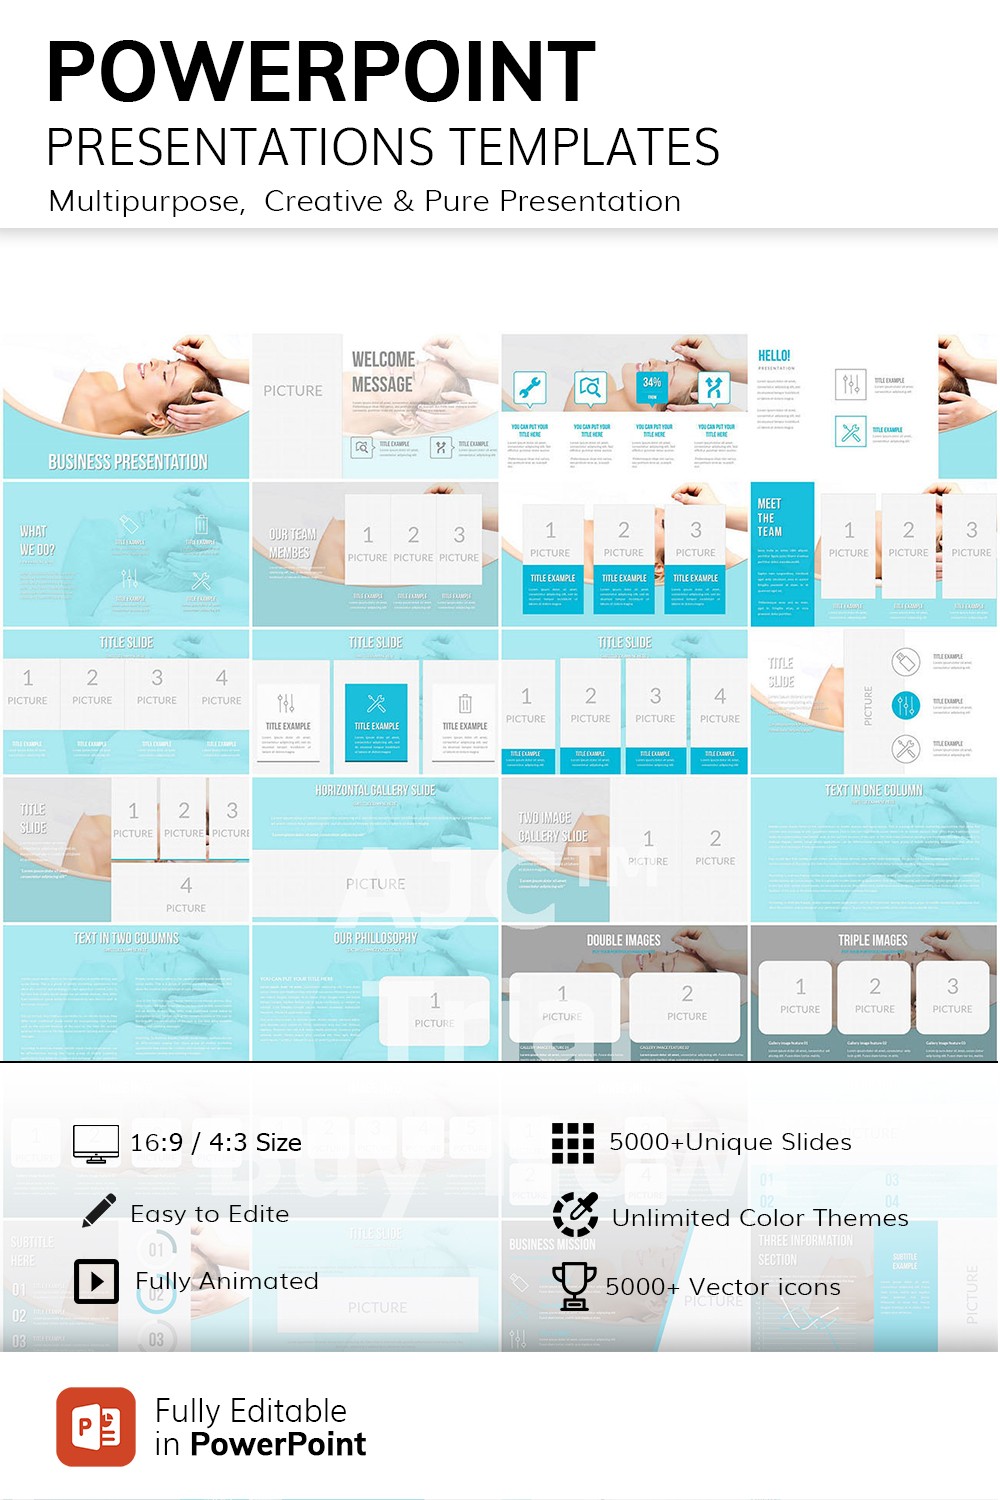 Acupuncture Health PowerPoint Templates | ImagineLayout.com